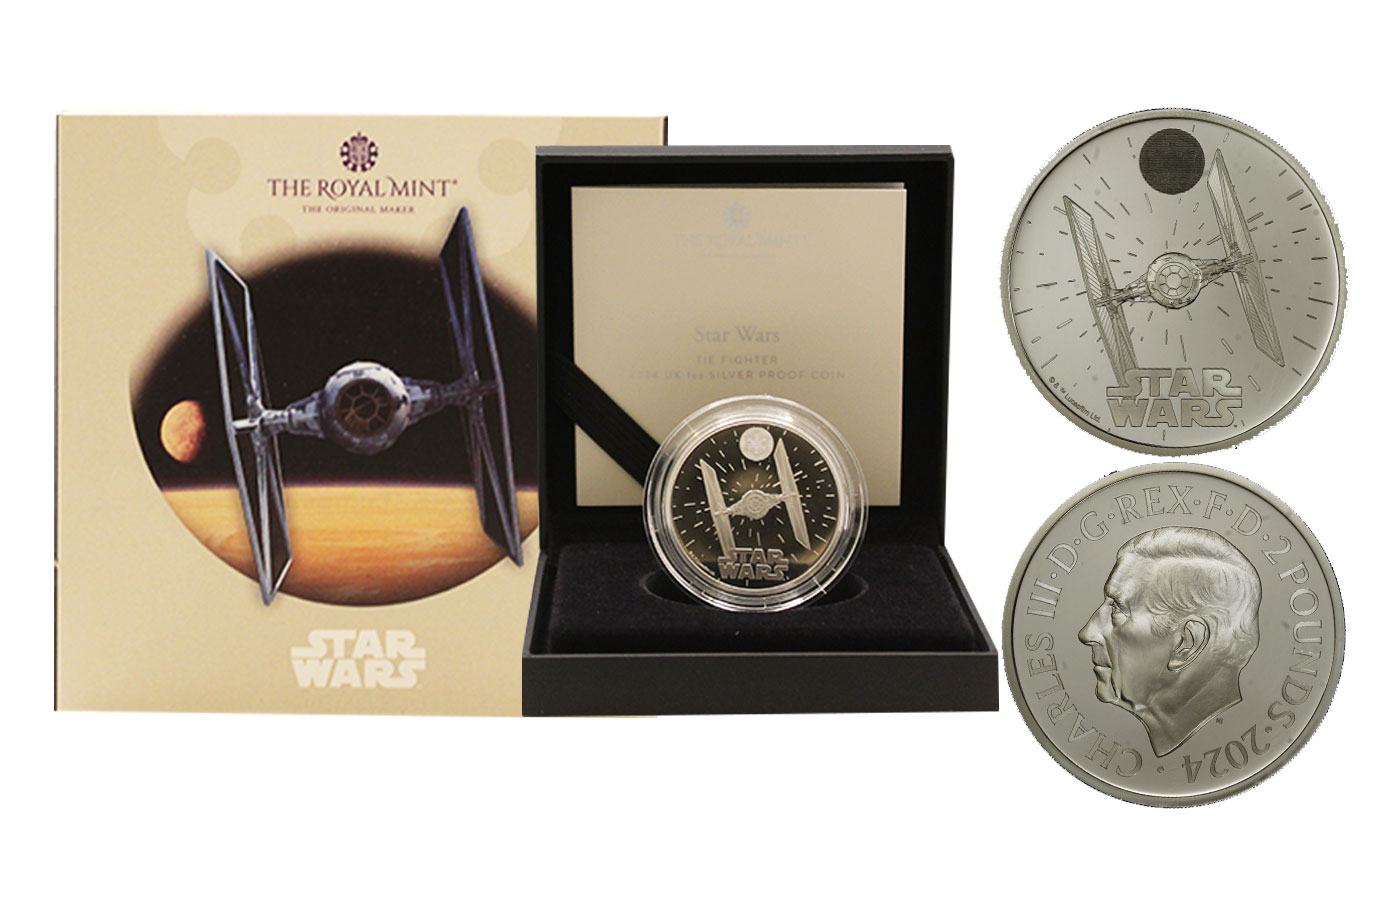 "Star Wars: TIE Fighter" - Re Carlo III - 2 Pounds gr. 31,21 in arg. 999/ - Tiratura 3000 pezzi